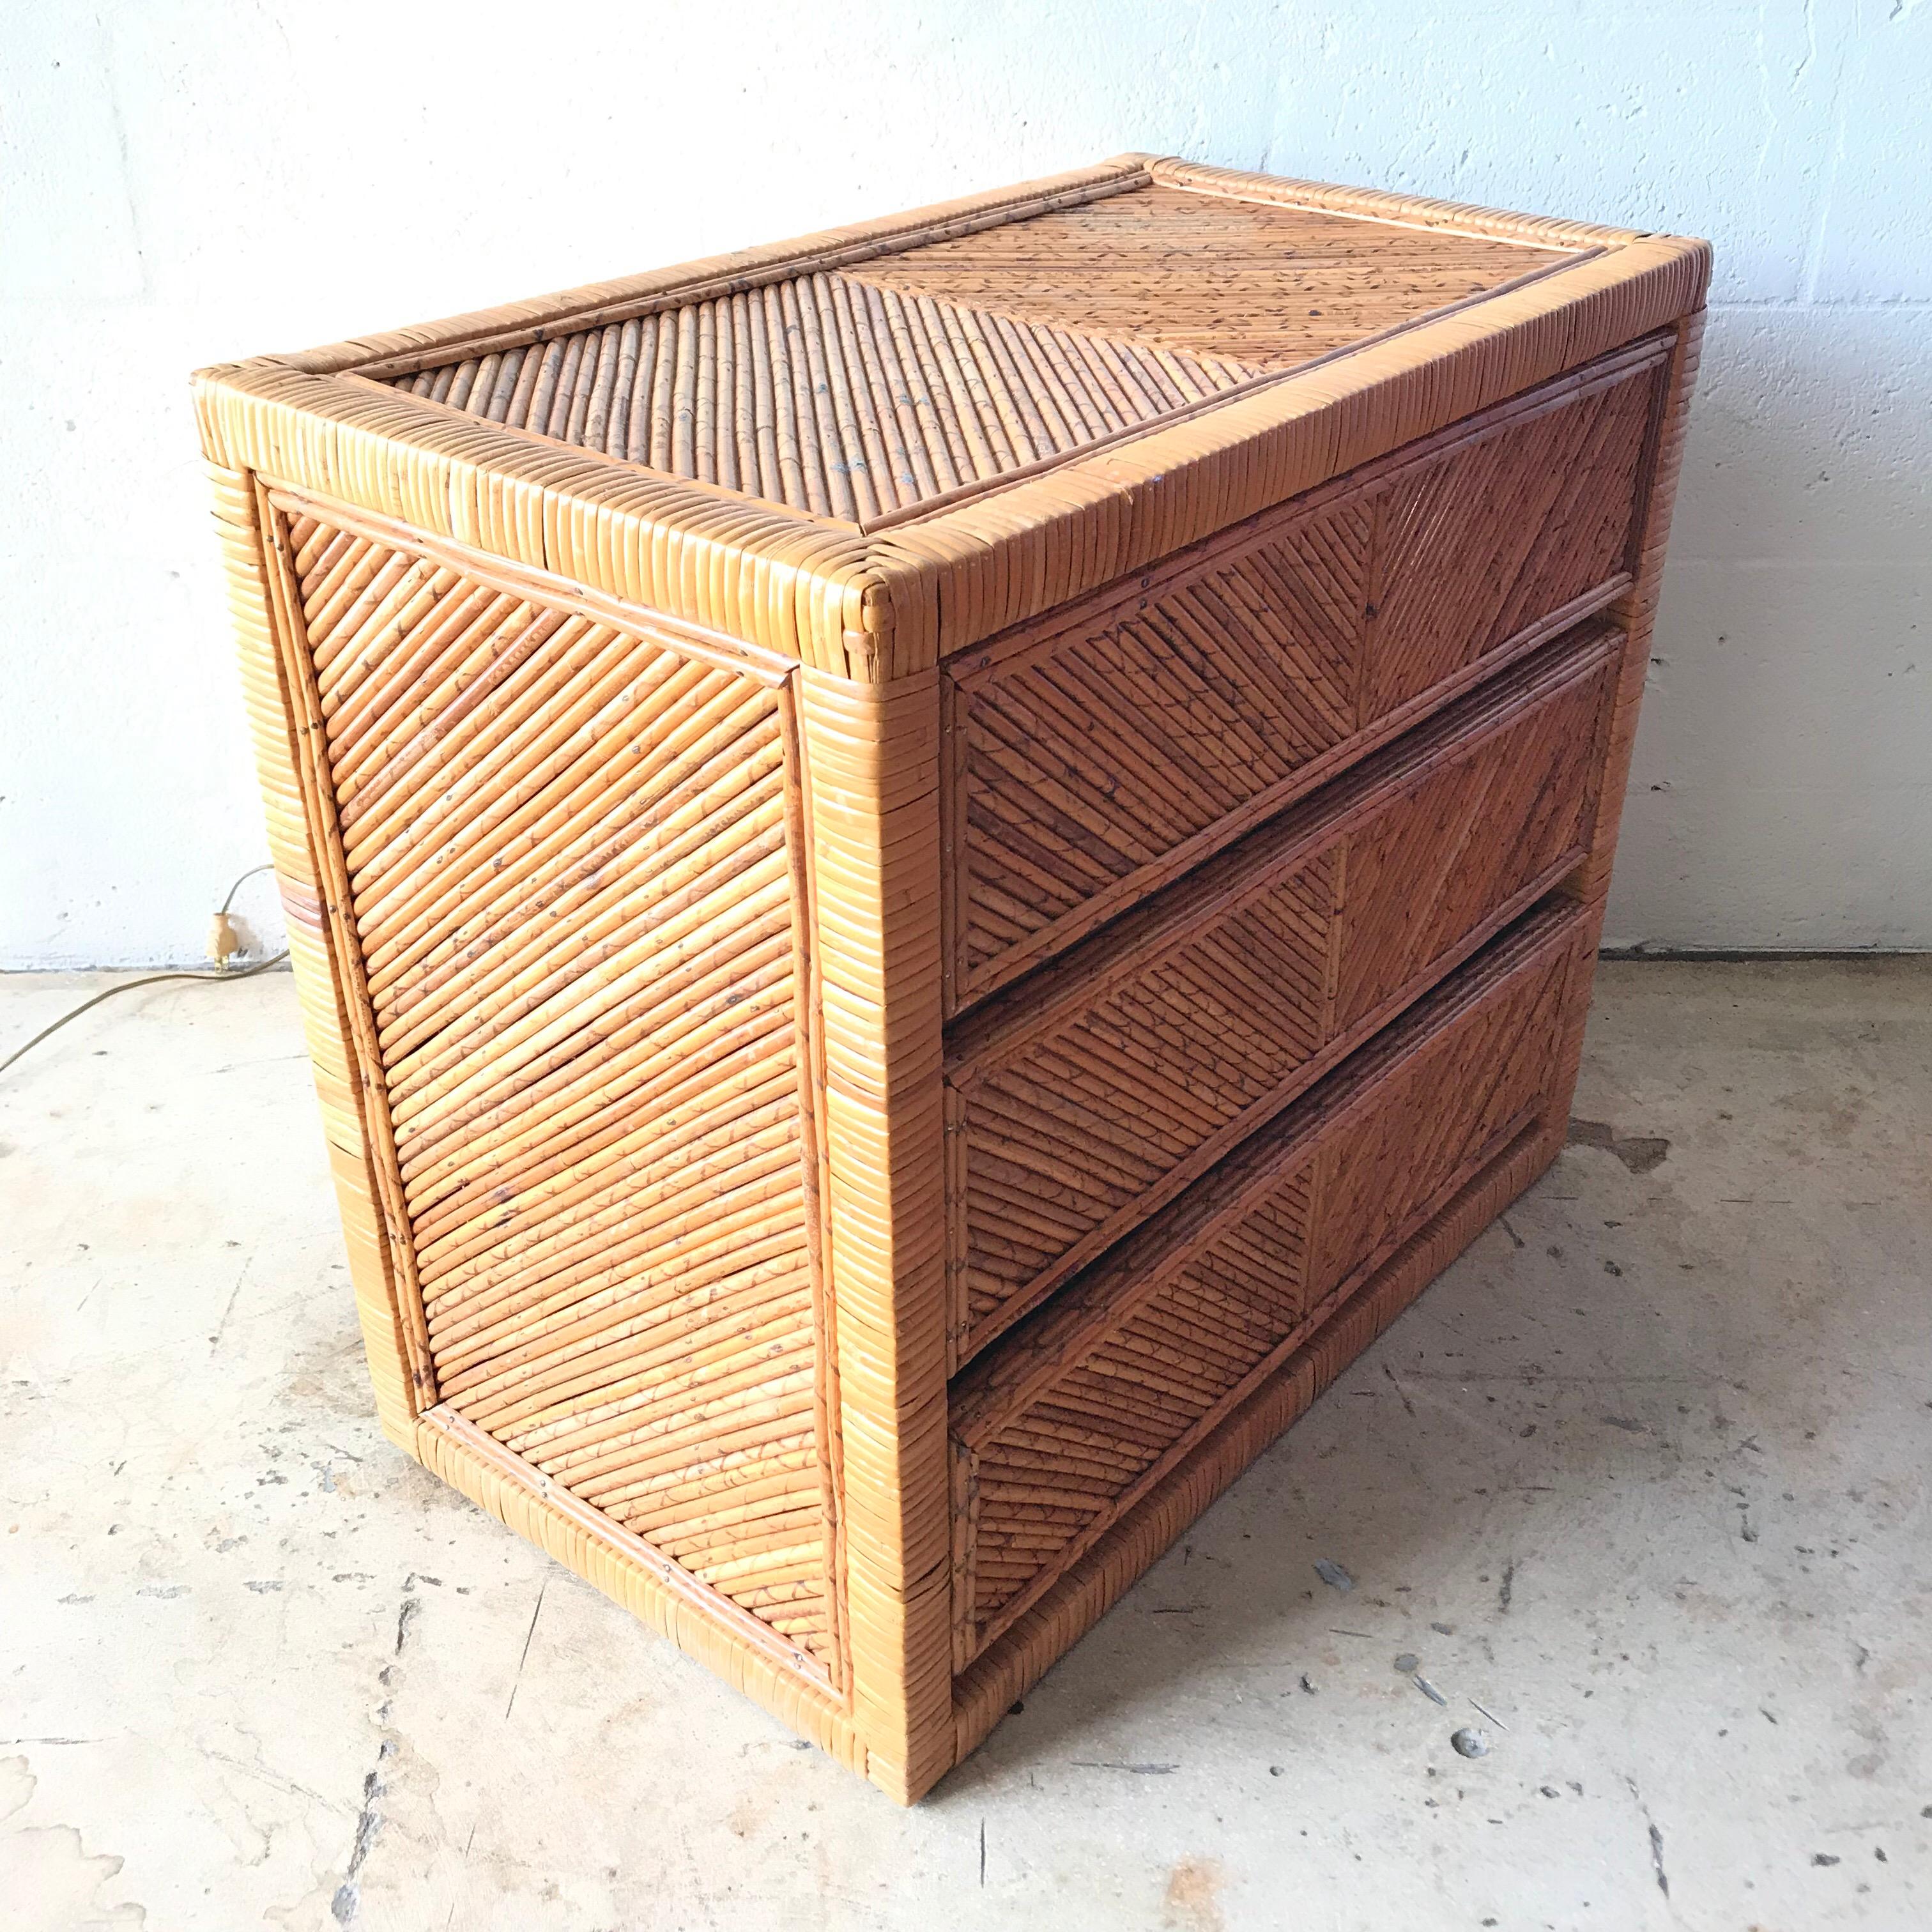 Three-drawer dresser or chest of drawers or commode rendered in wicker bamboo rattan split reed, finished on all sides.